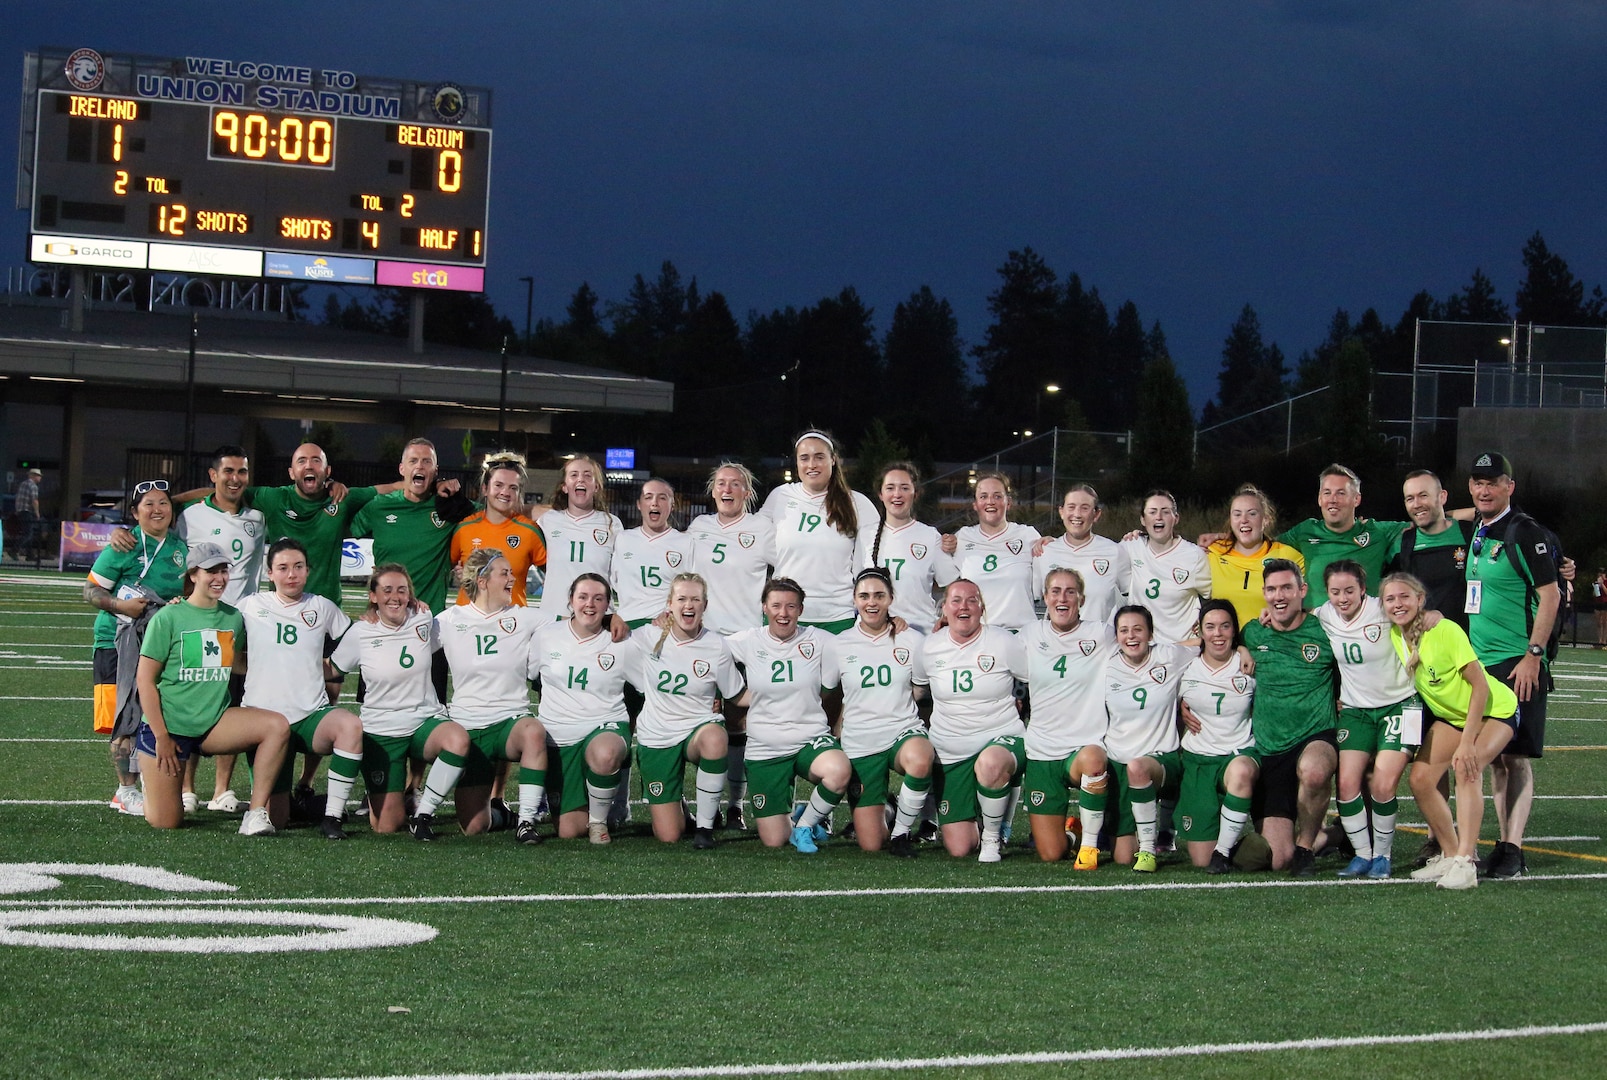 Ireland celebrates their first CISM Women's Football victory with a 1-0 win over Belgium,.  The 13th Conseil International du Sport Militaire (CISM) World Women's Military Football Championship hosted by Fairchild Air Force Base in Spokane, Washingon, is Ireland's first CISM Women's Football competition.  This year's championship features teams from the United States, Belgium, Cameroon, Canada, France, Germany, Ireland, Mali, Netherlands, and South Korea.  (Department of Defense Photo by Mr. Steven Dinote, released).